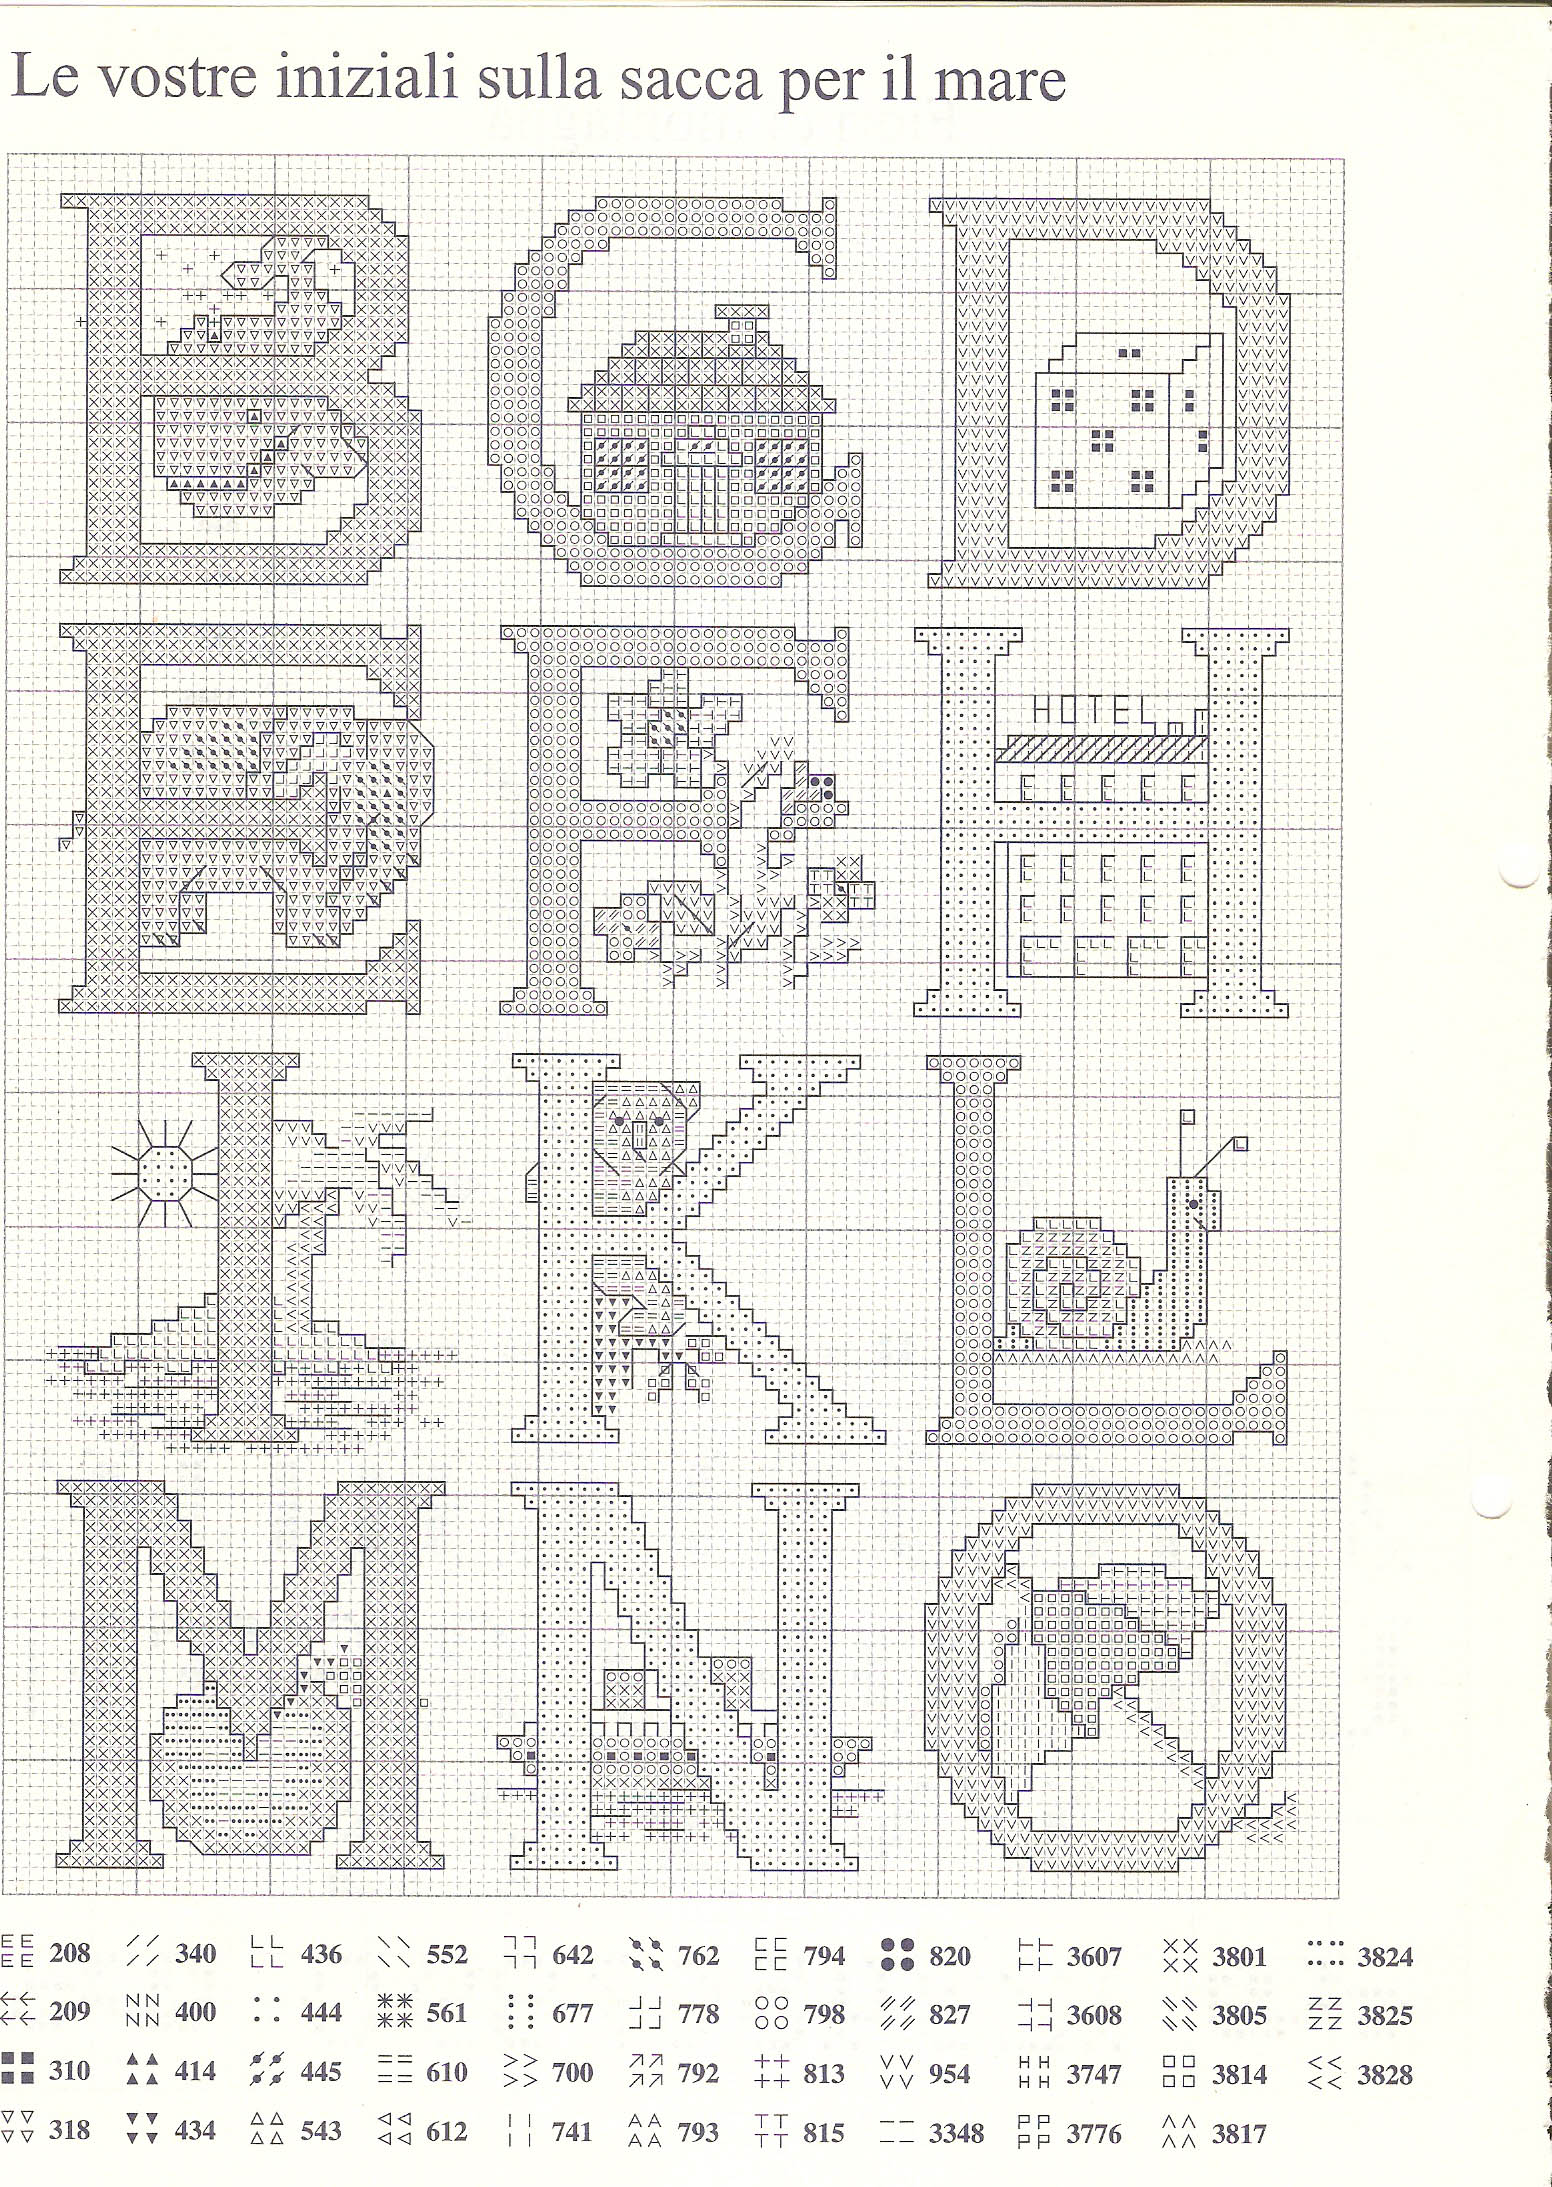 Cross stitch alphabet with various objects (2)